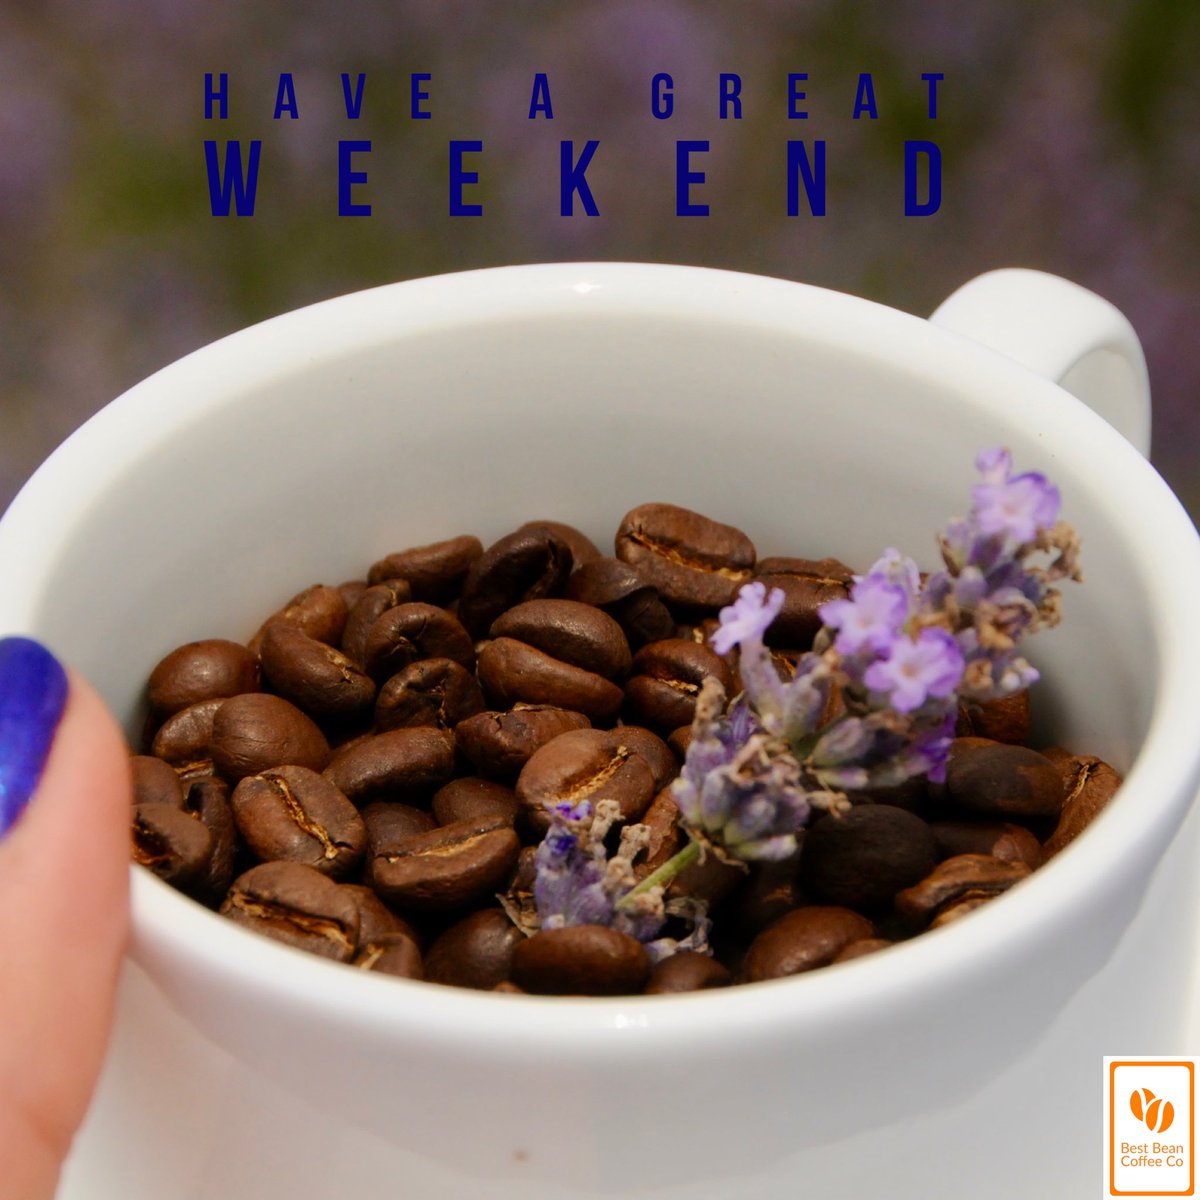 It’s Friday yey🙂 
Have you planned your weekend yet ?
.
.
#greatfriday #lovelyday #weekend #coffeetime #coffee #specialtycoffee #roasters #coffeecup #cupofbestbeans #freshroastedcoffee #coffeeincrediton #coffeeplease #fridayphotography #like